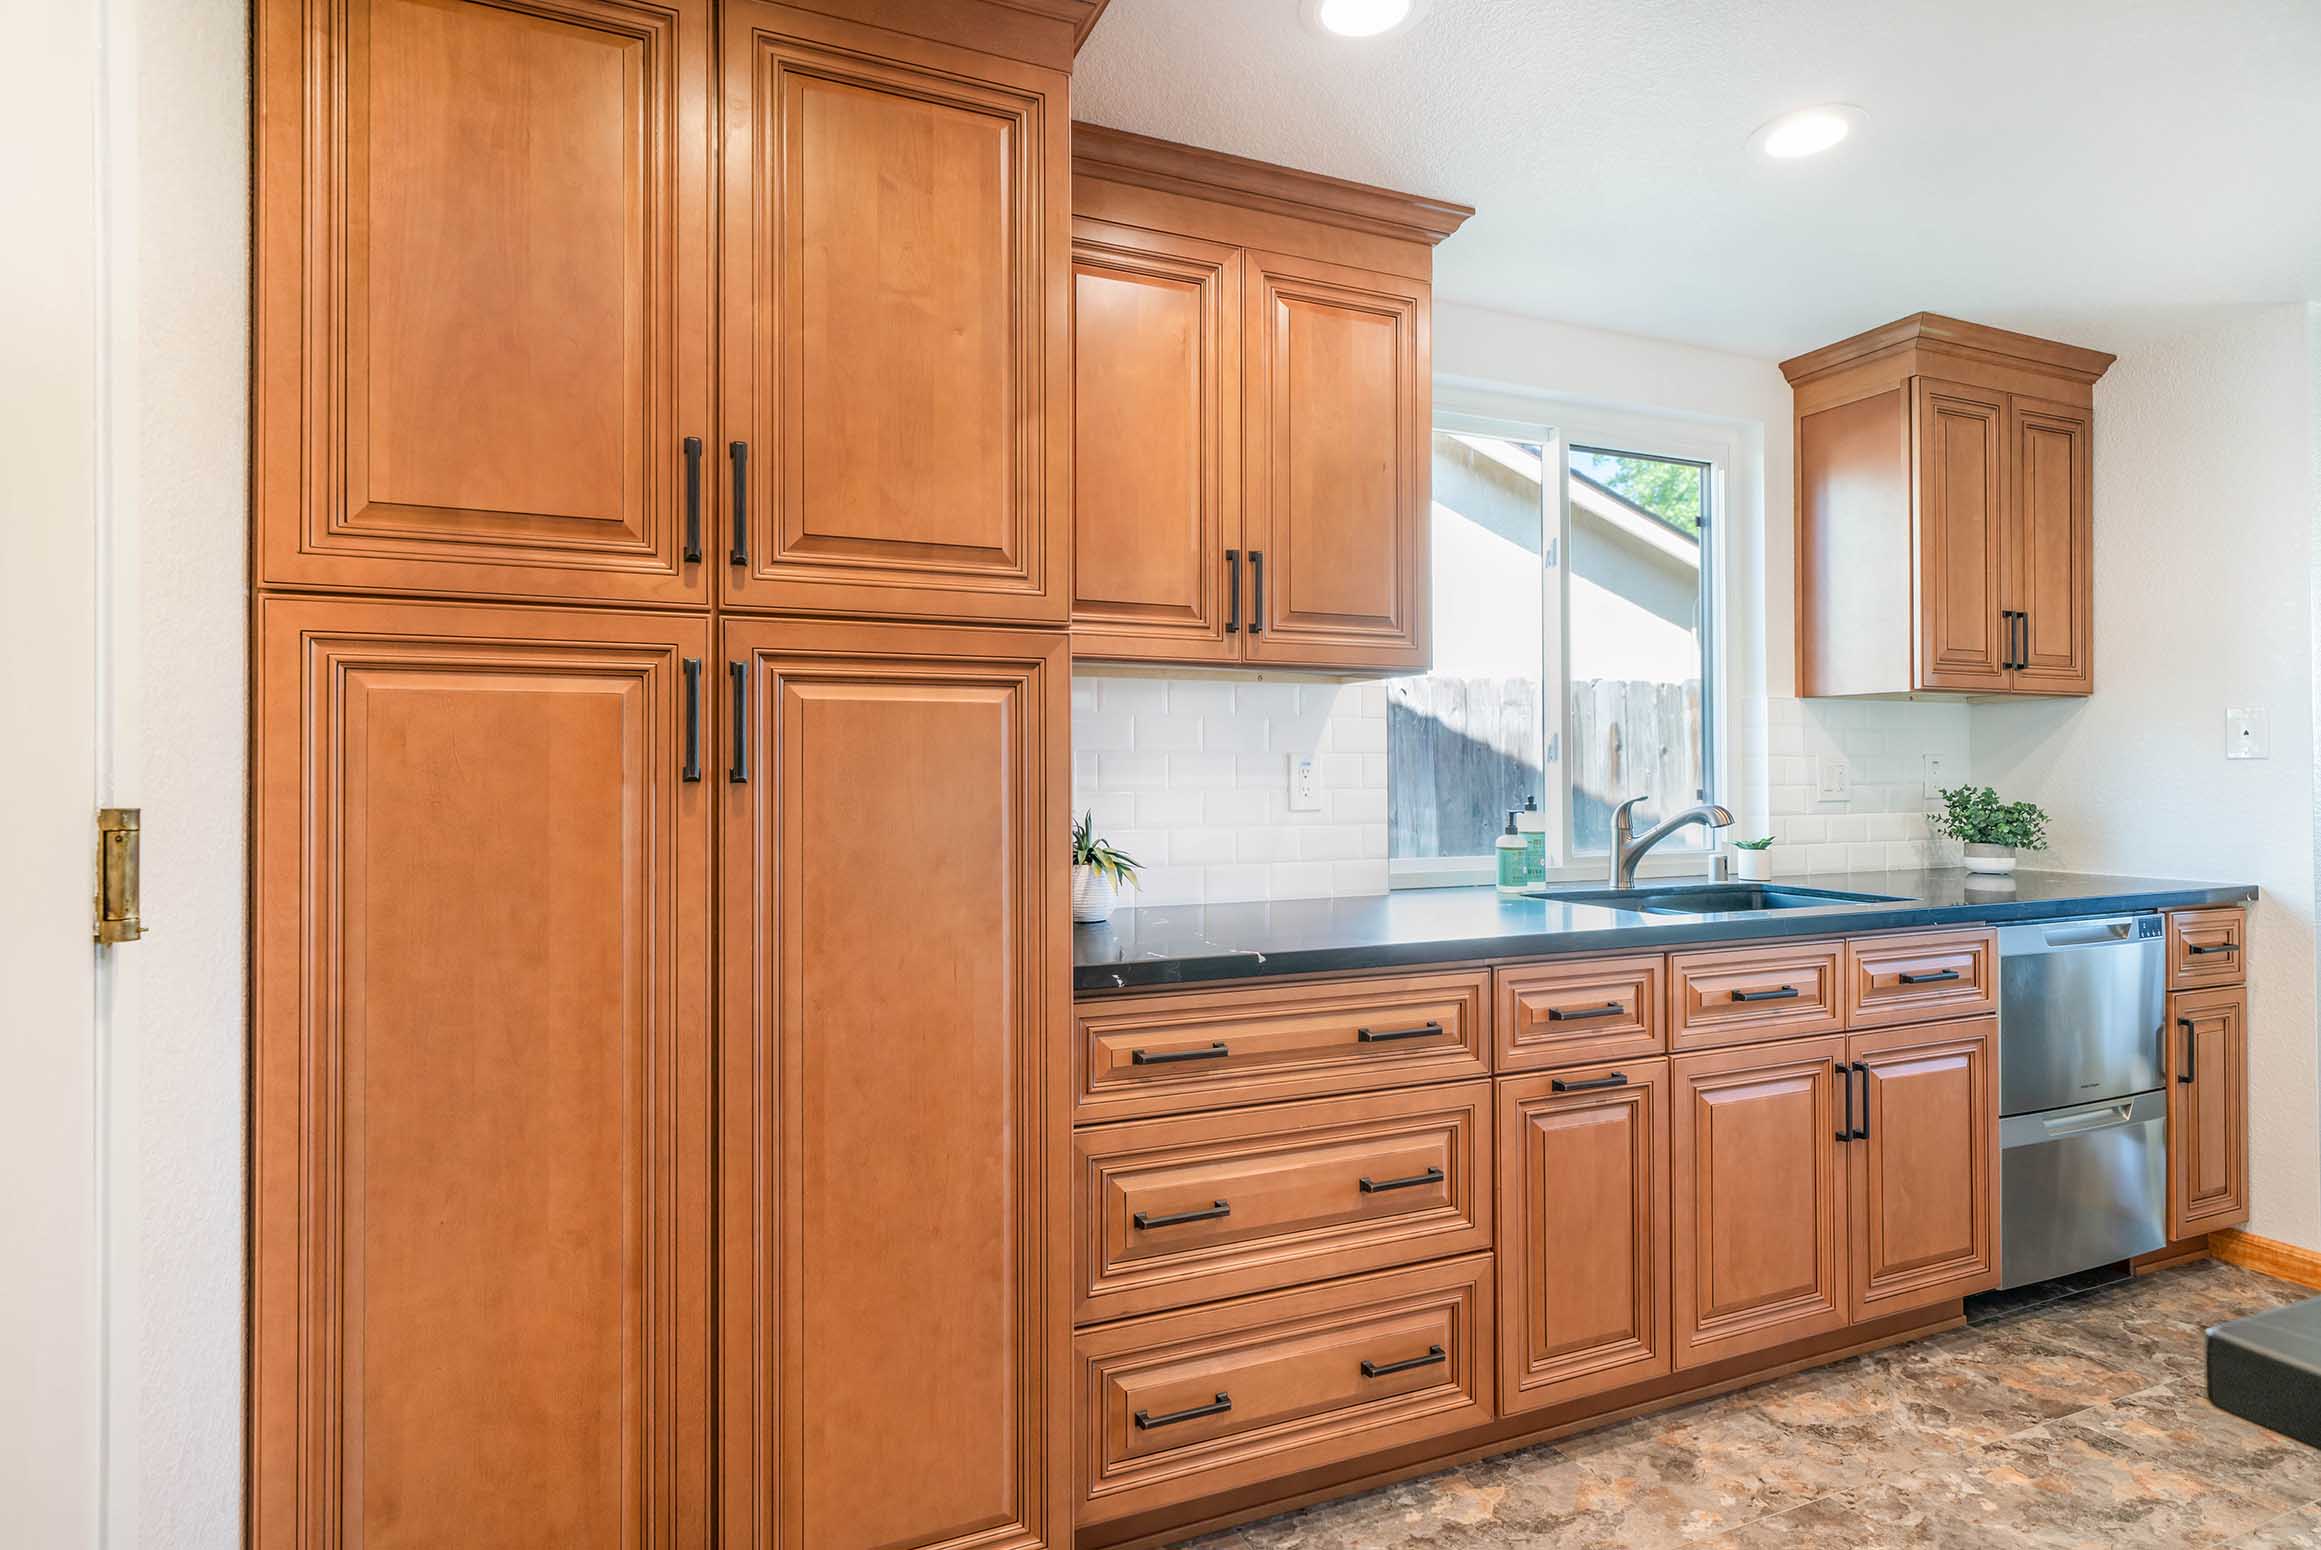 Sacramento, CA Kitchen After Remodel by Luxehome Construction